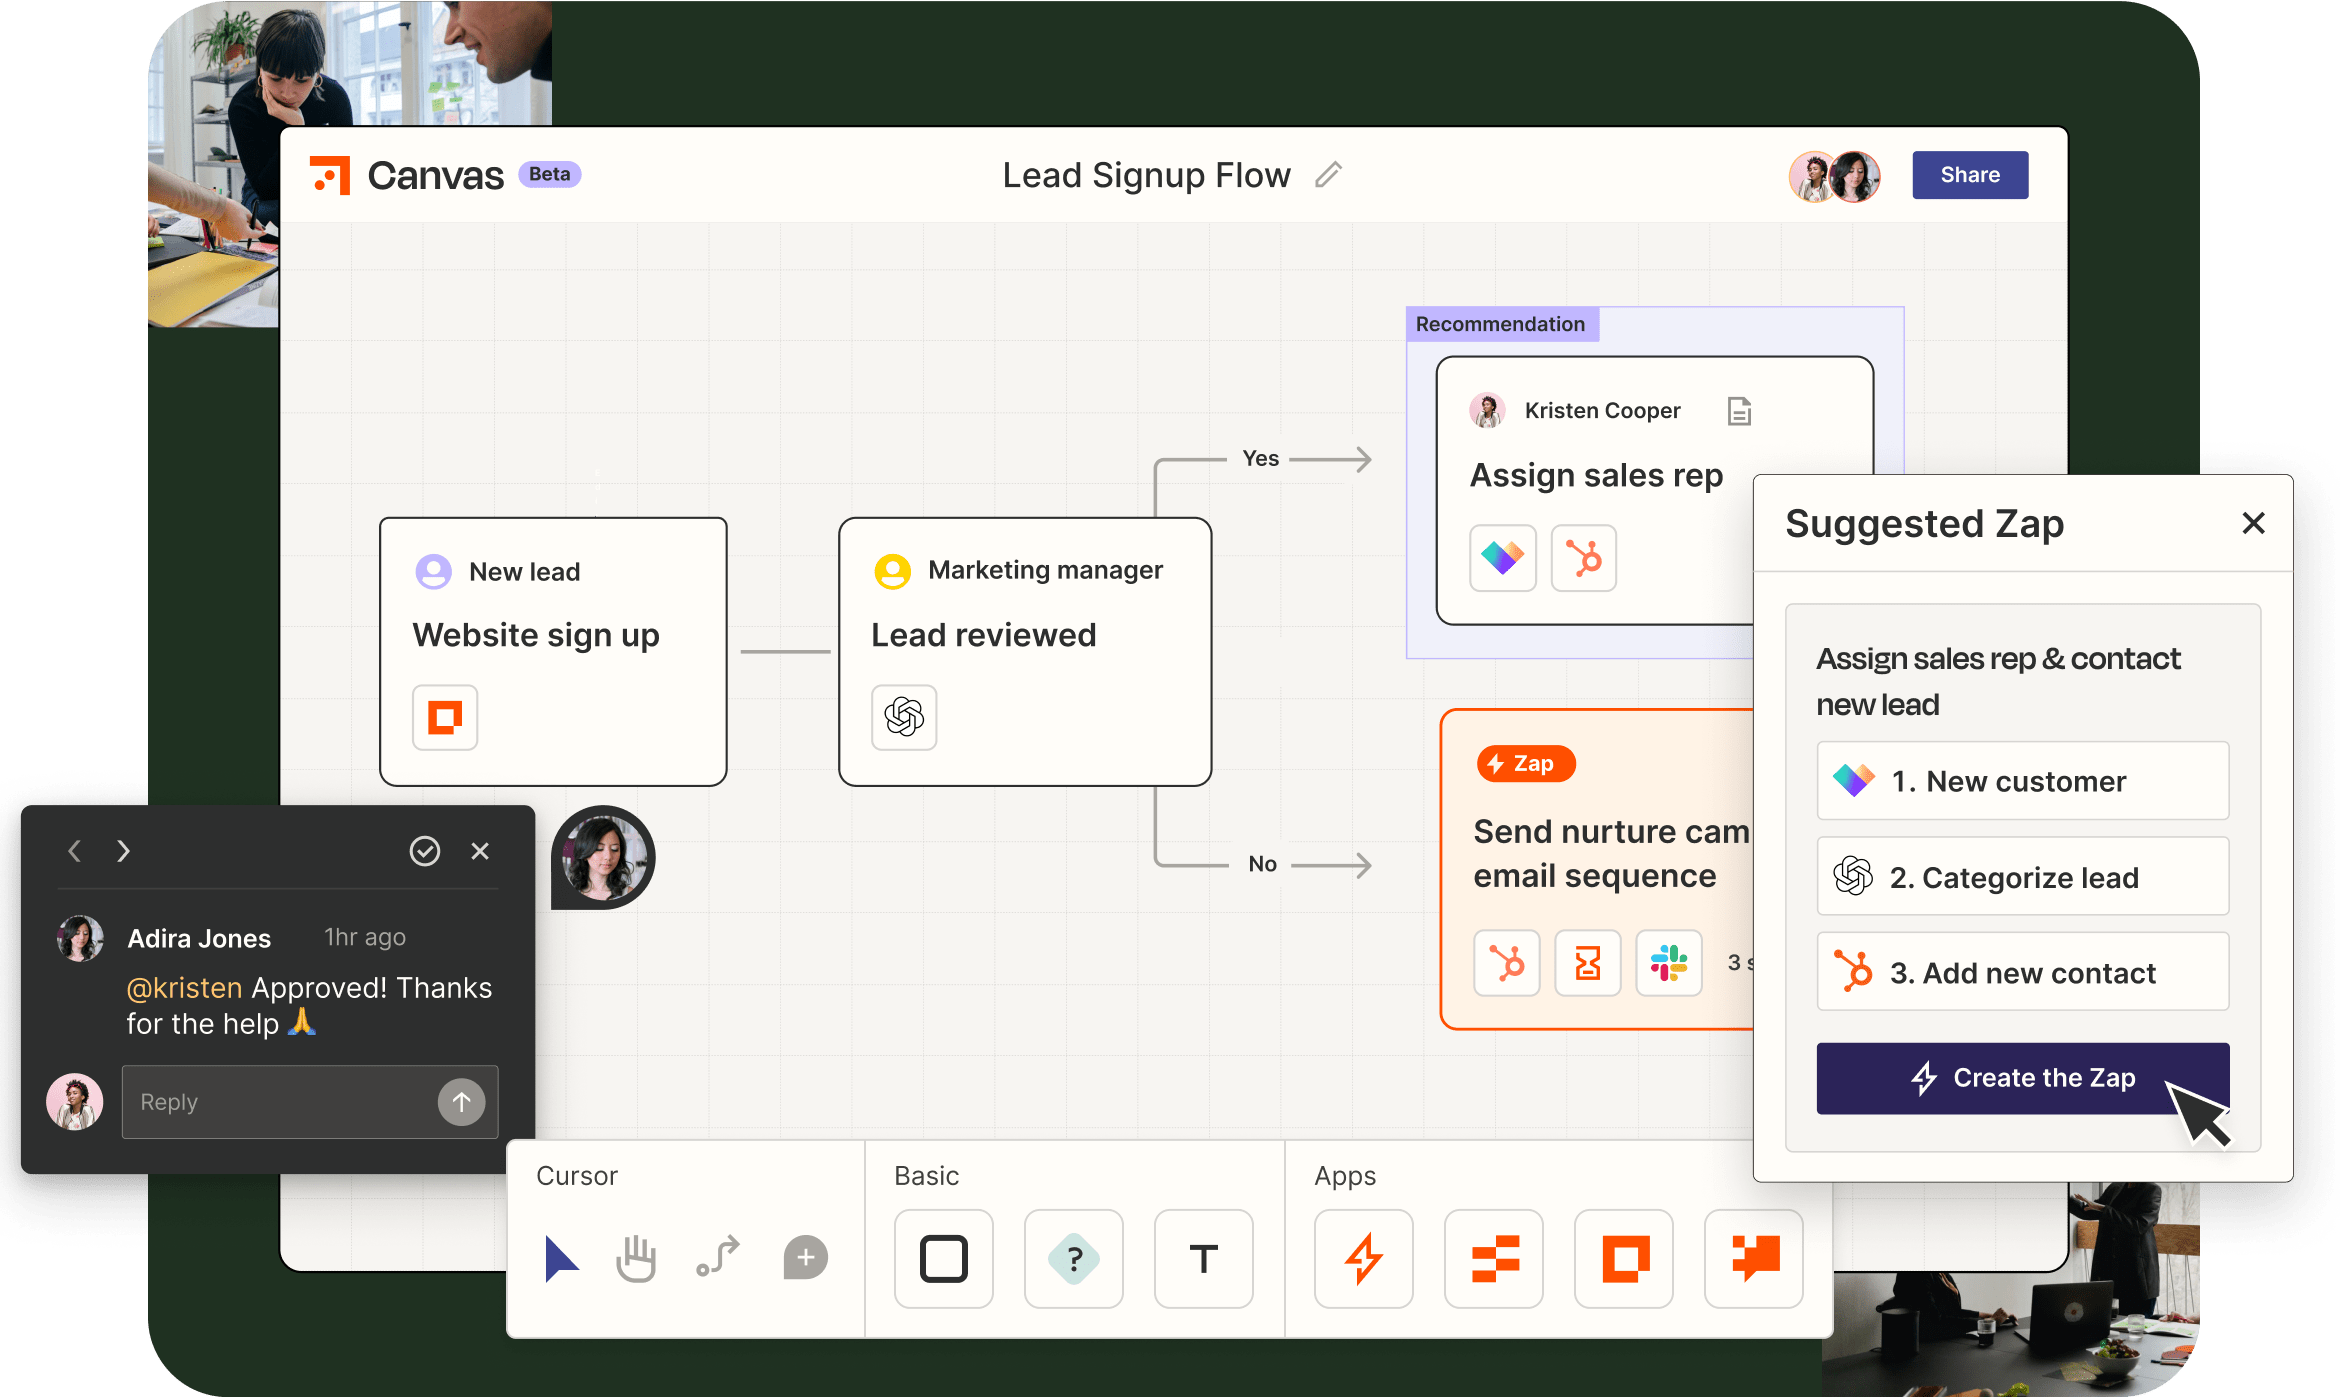 A canvas showing a lead generation workflow with comments, collaboration, and an AI recommendation